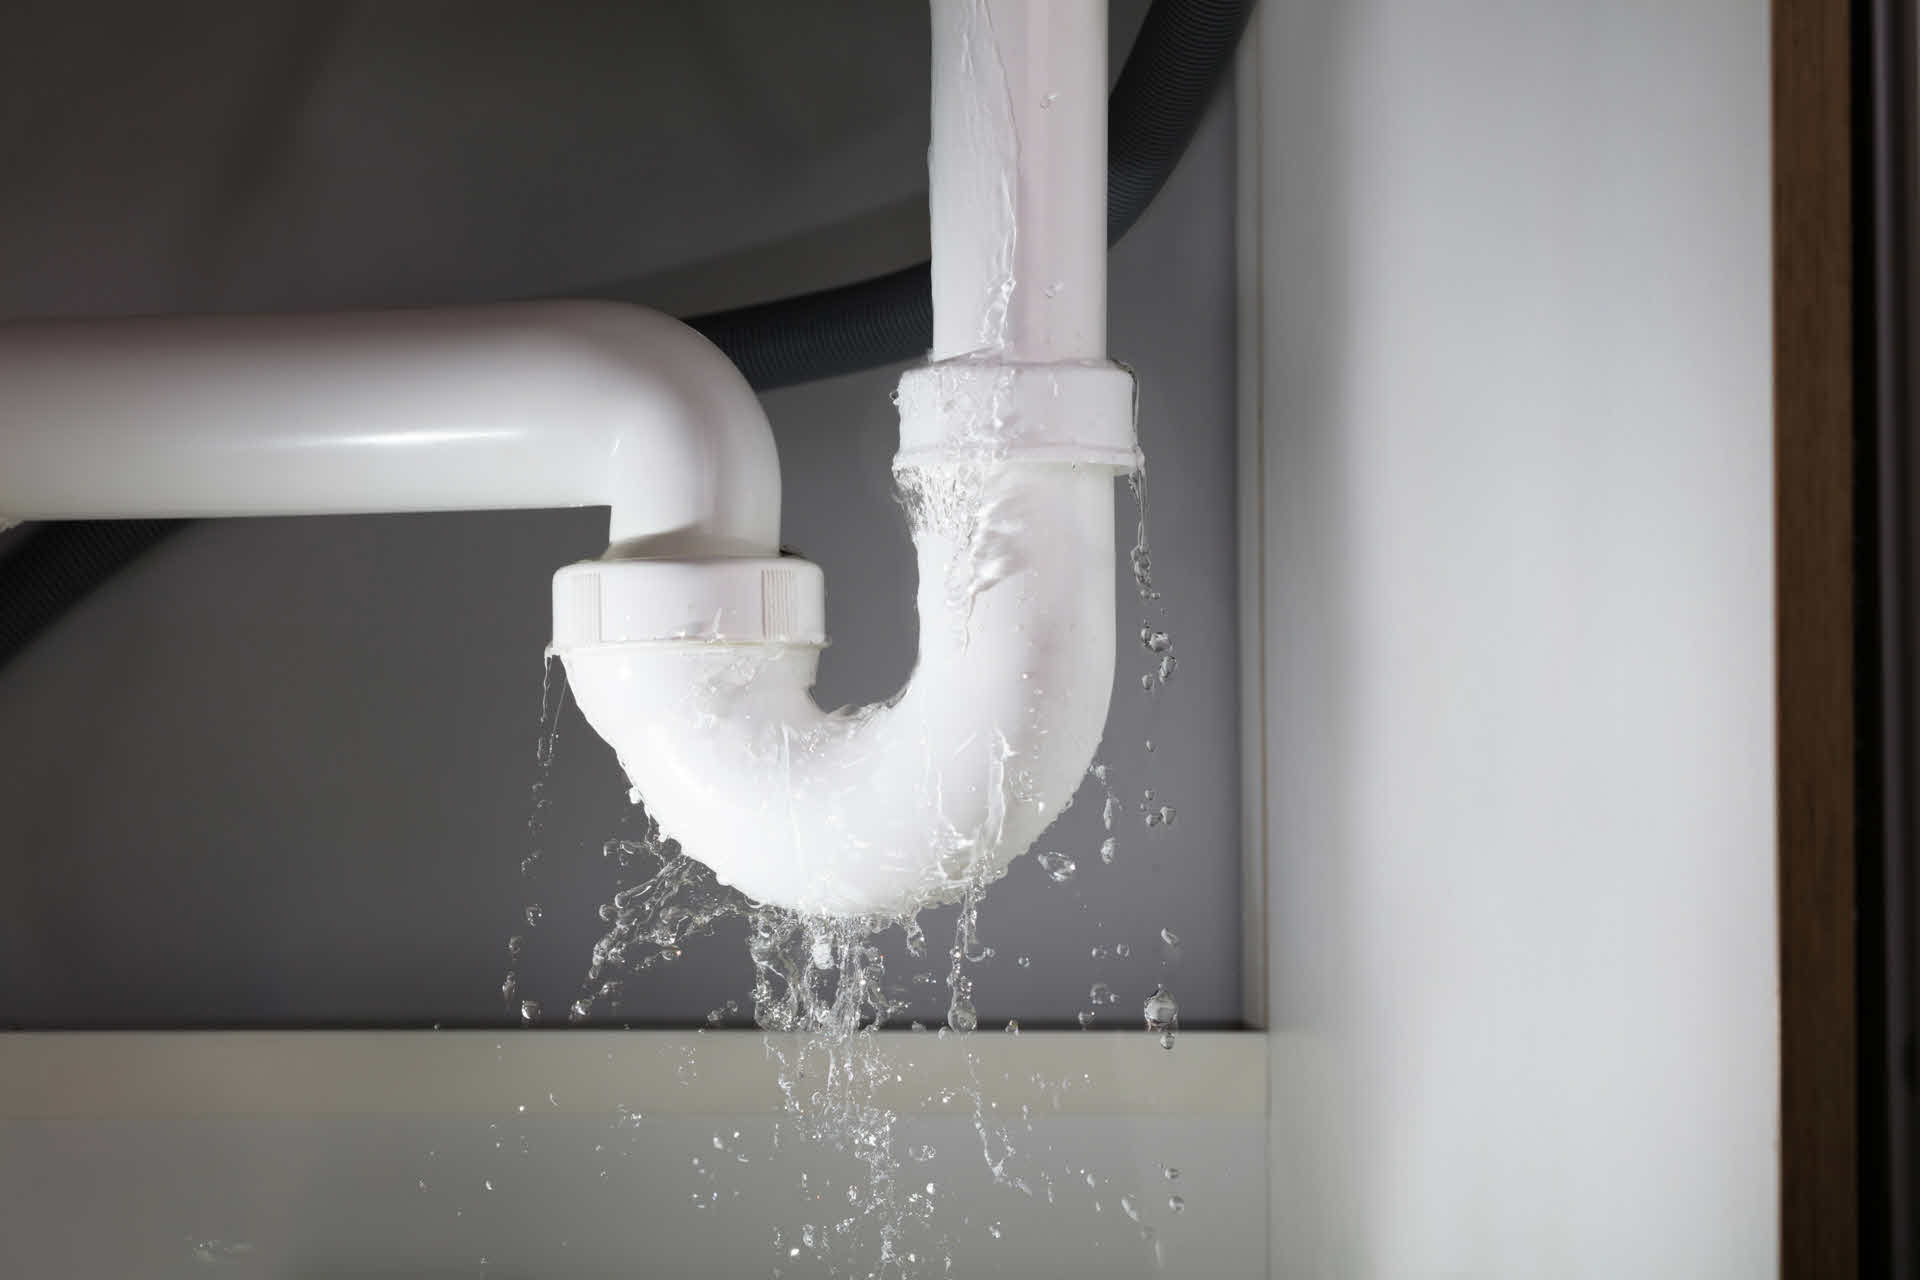 A full service plumbing company, we fix dripping faucets, clogged drains, frozen or broken pipes, garbage disposals and anything else that's a plumbing problem!